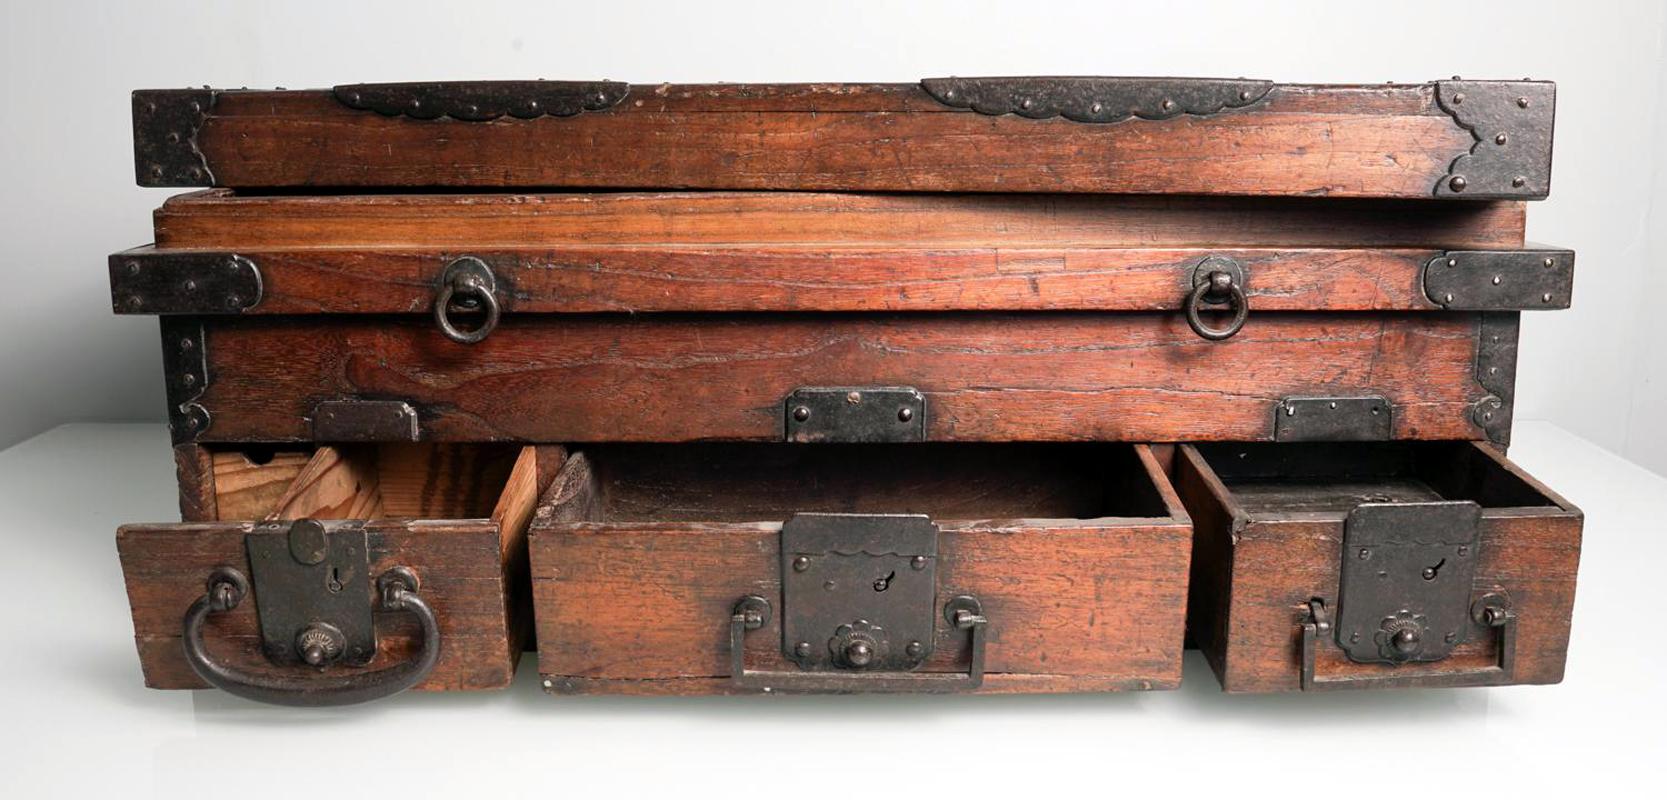 Iron Rare Inscribed Japanese Wood Chest Zenibako on Custom Stand For Sale